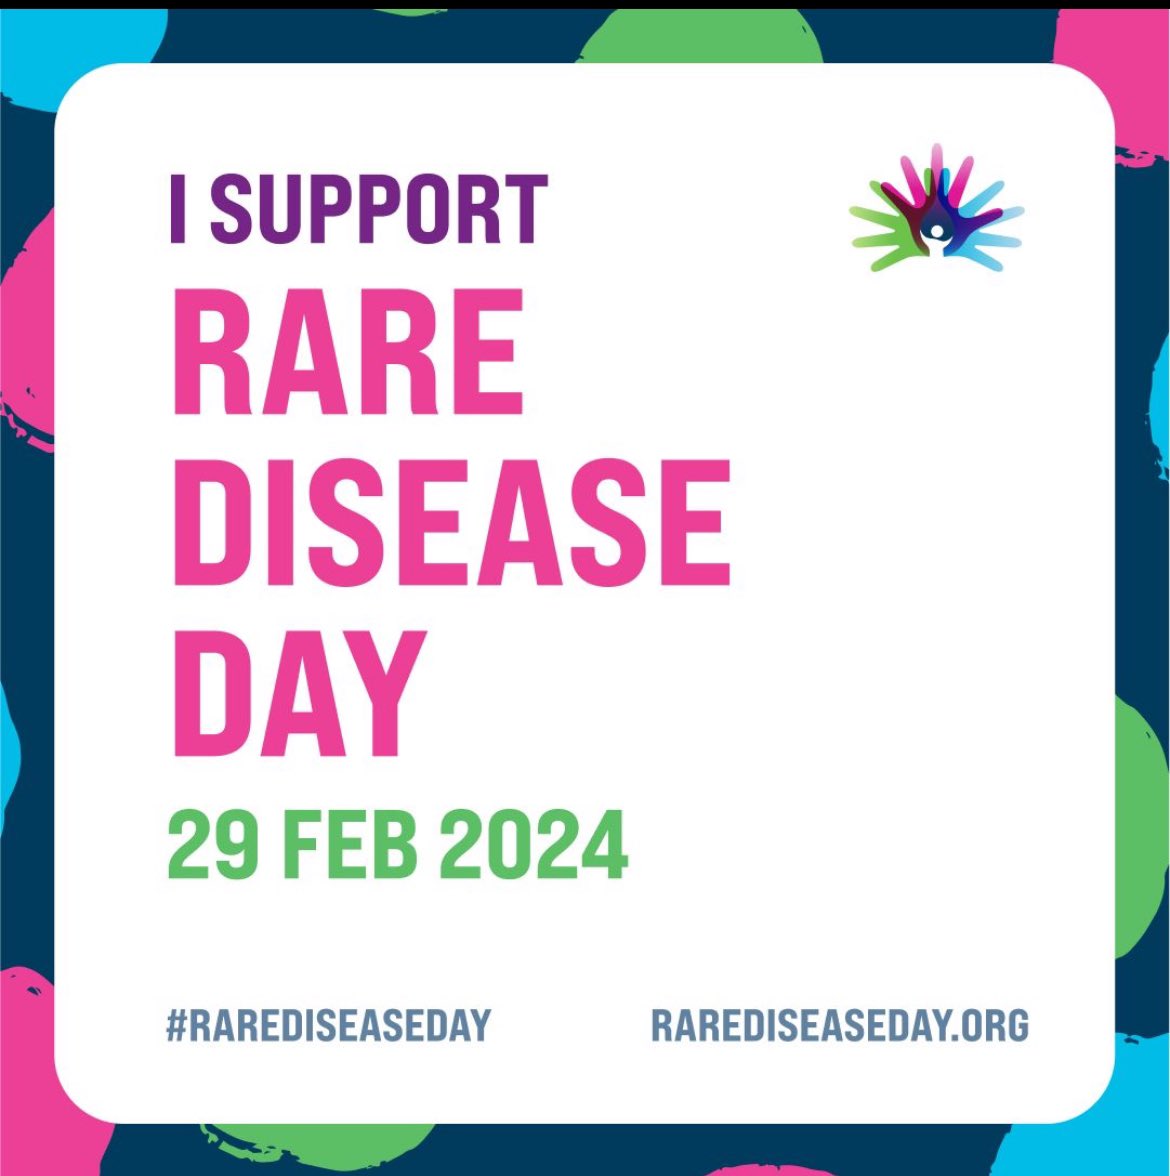 Today is the Rare Disease Day. Switzerland will hopefully soon have a national Network for Rare Liver Diseases working on harmonized pathways of care and education in this important topic. Let’s help our patients by joining forces @SASL_School #Kosek